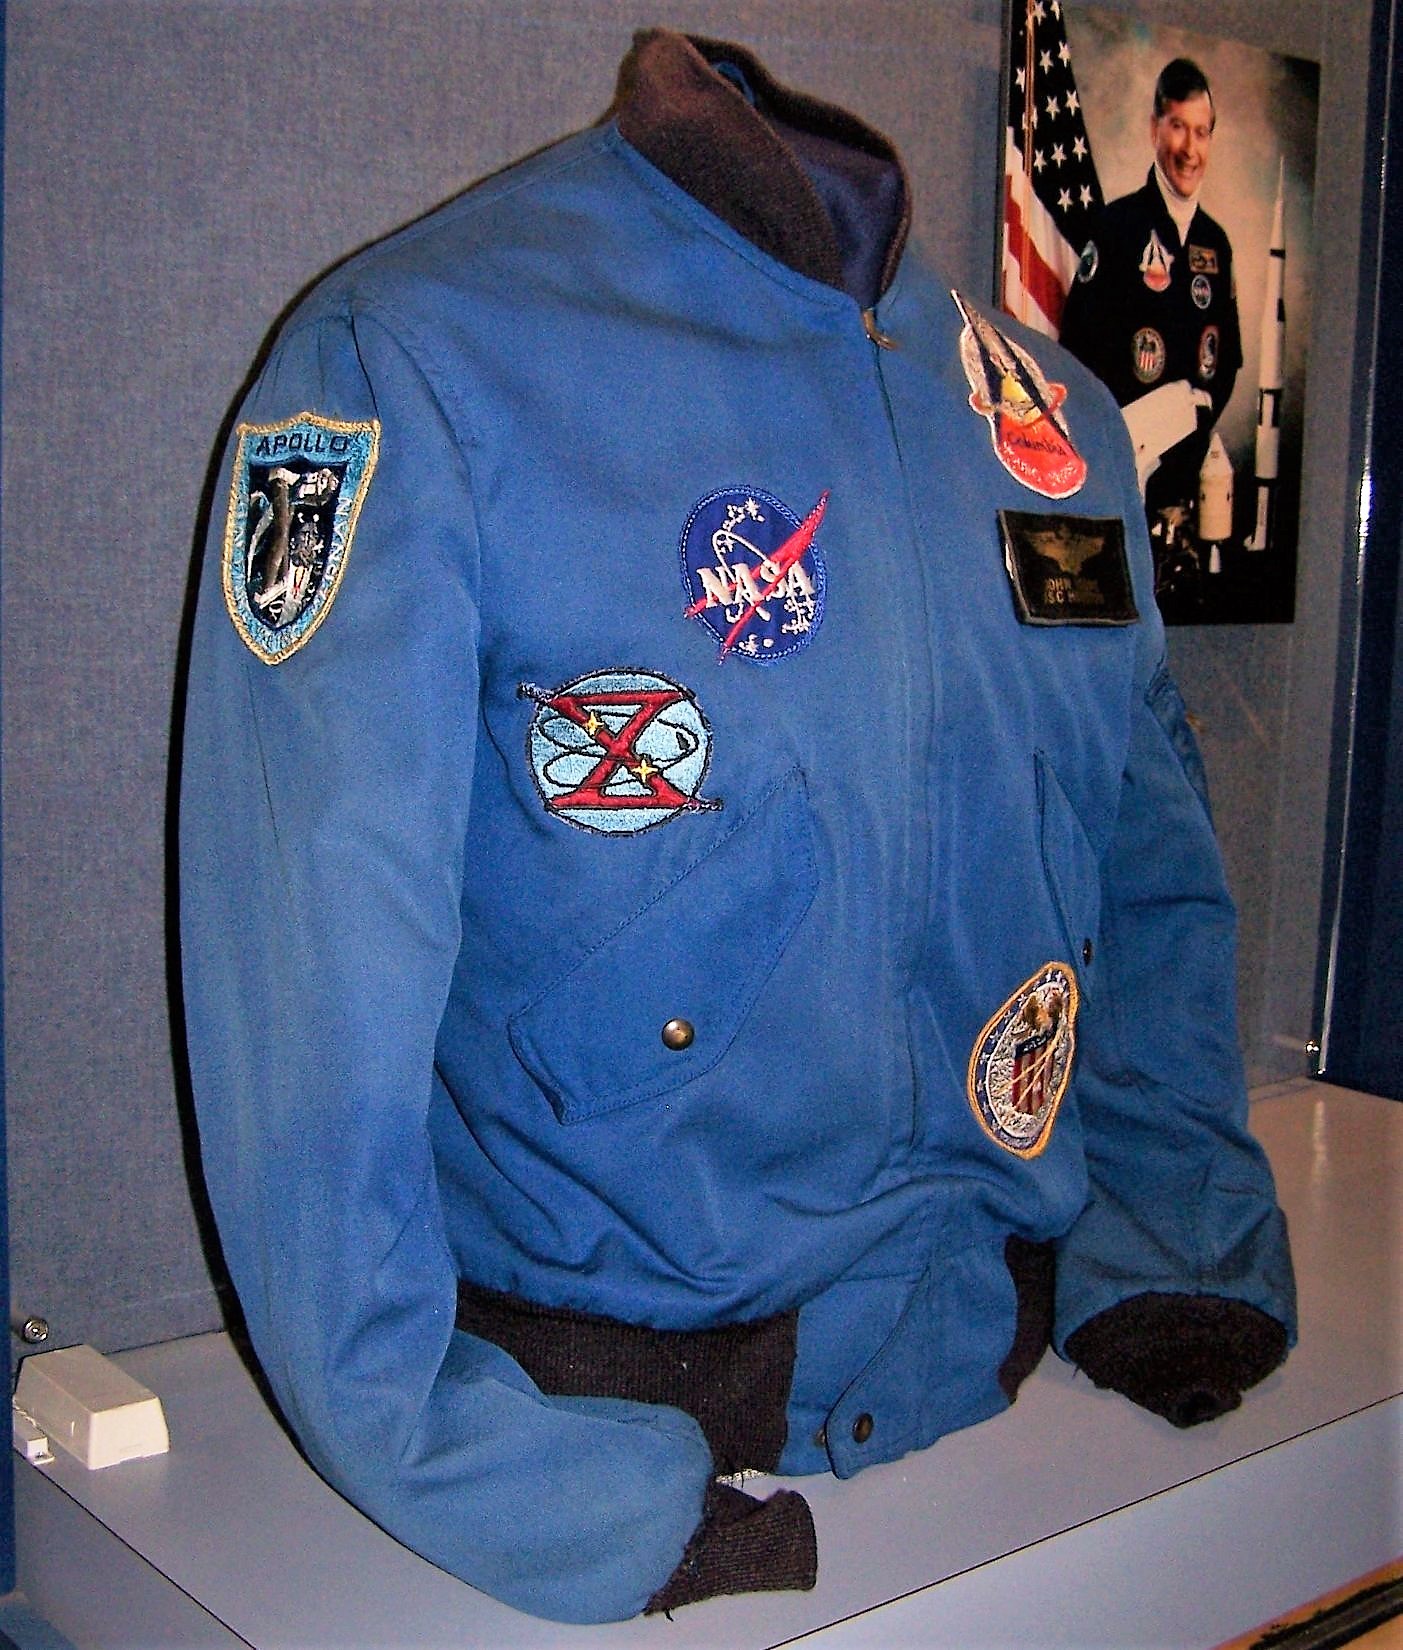 Artifacts from the former U.S. Astronaut Hall of Fame® recently found new homes in two stunning displays at the visitor complex, including John Young's Flight Jacket.